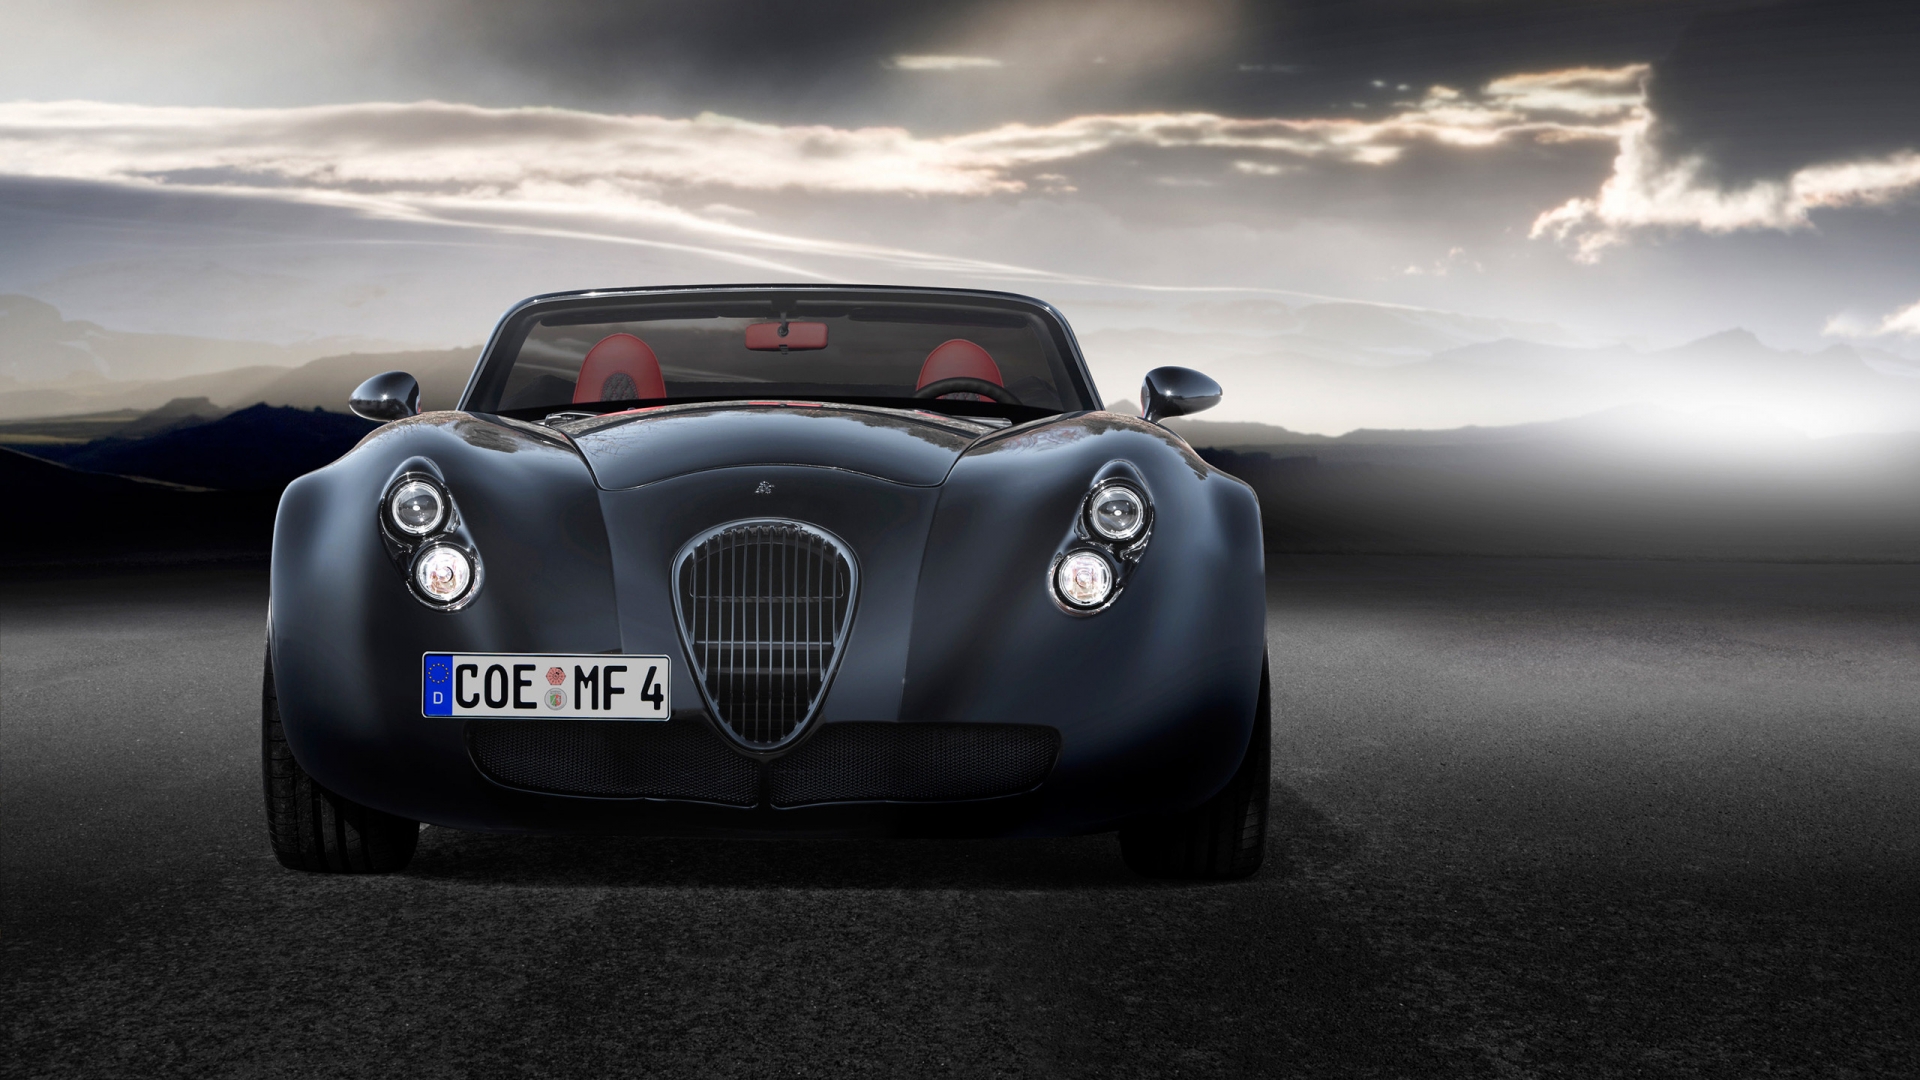 Wiesmann Roadster MF4 Front for 1920 x 1080 HDTV 1080p resolution